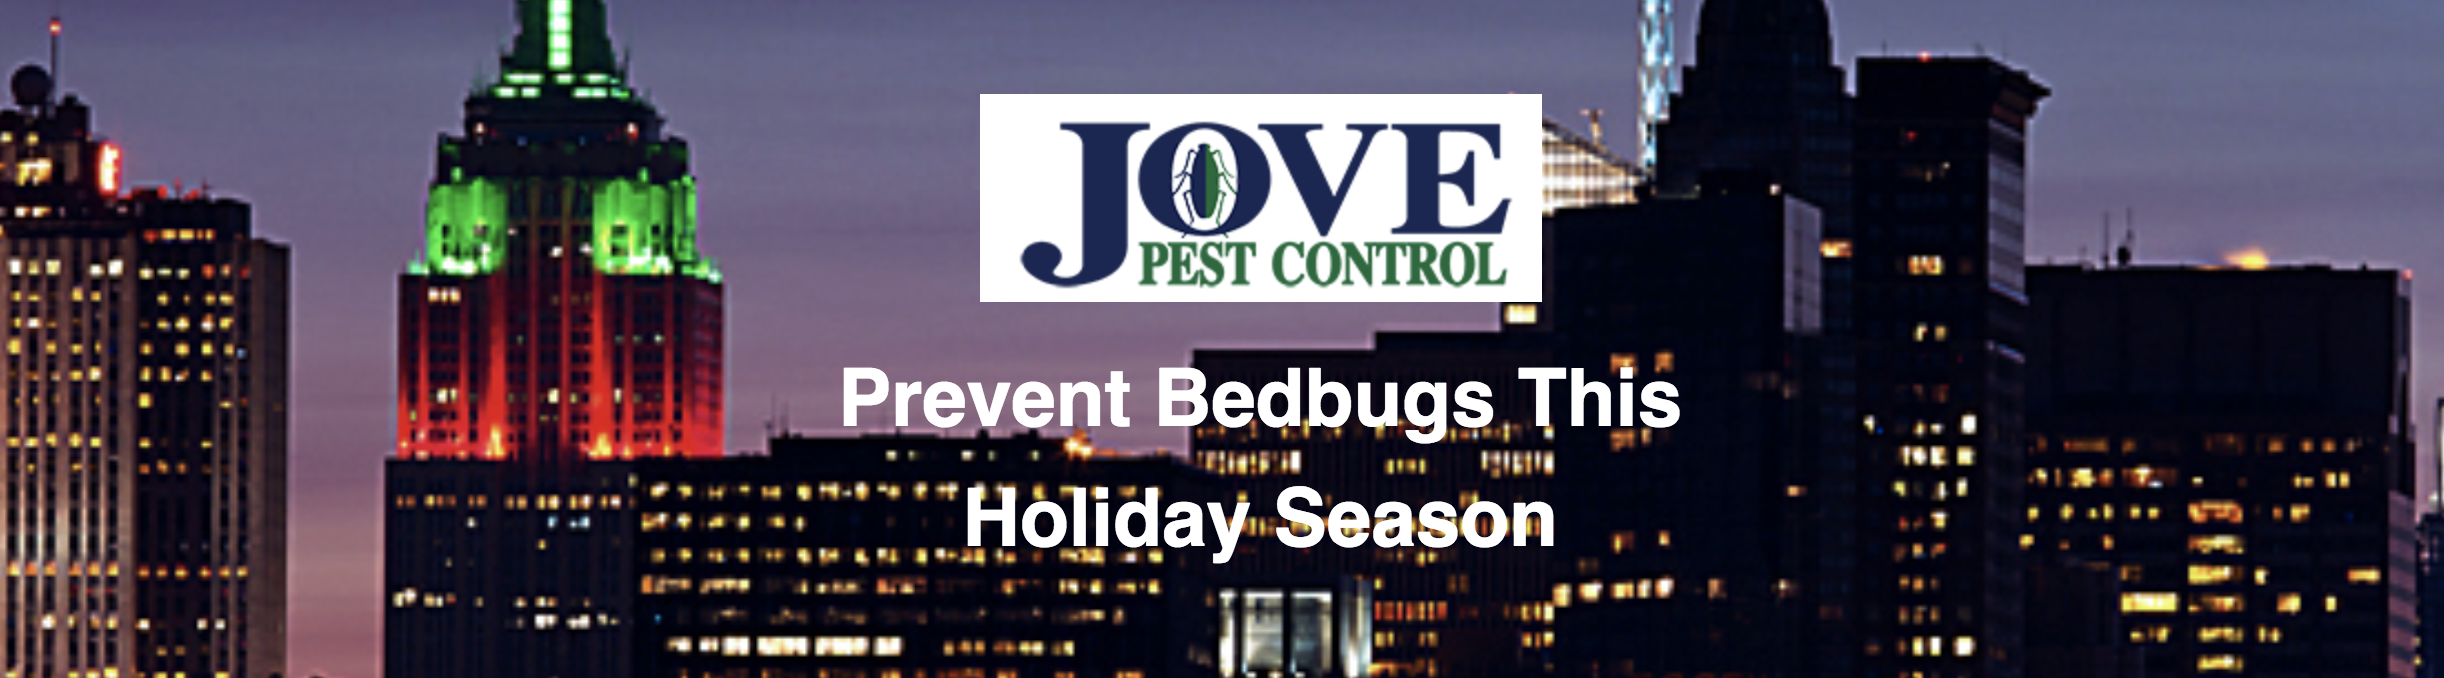 4 Tips To Prevent Bedbugs This Holiday Season